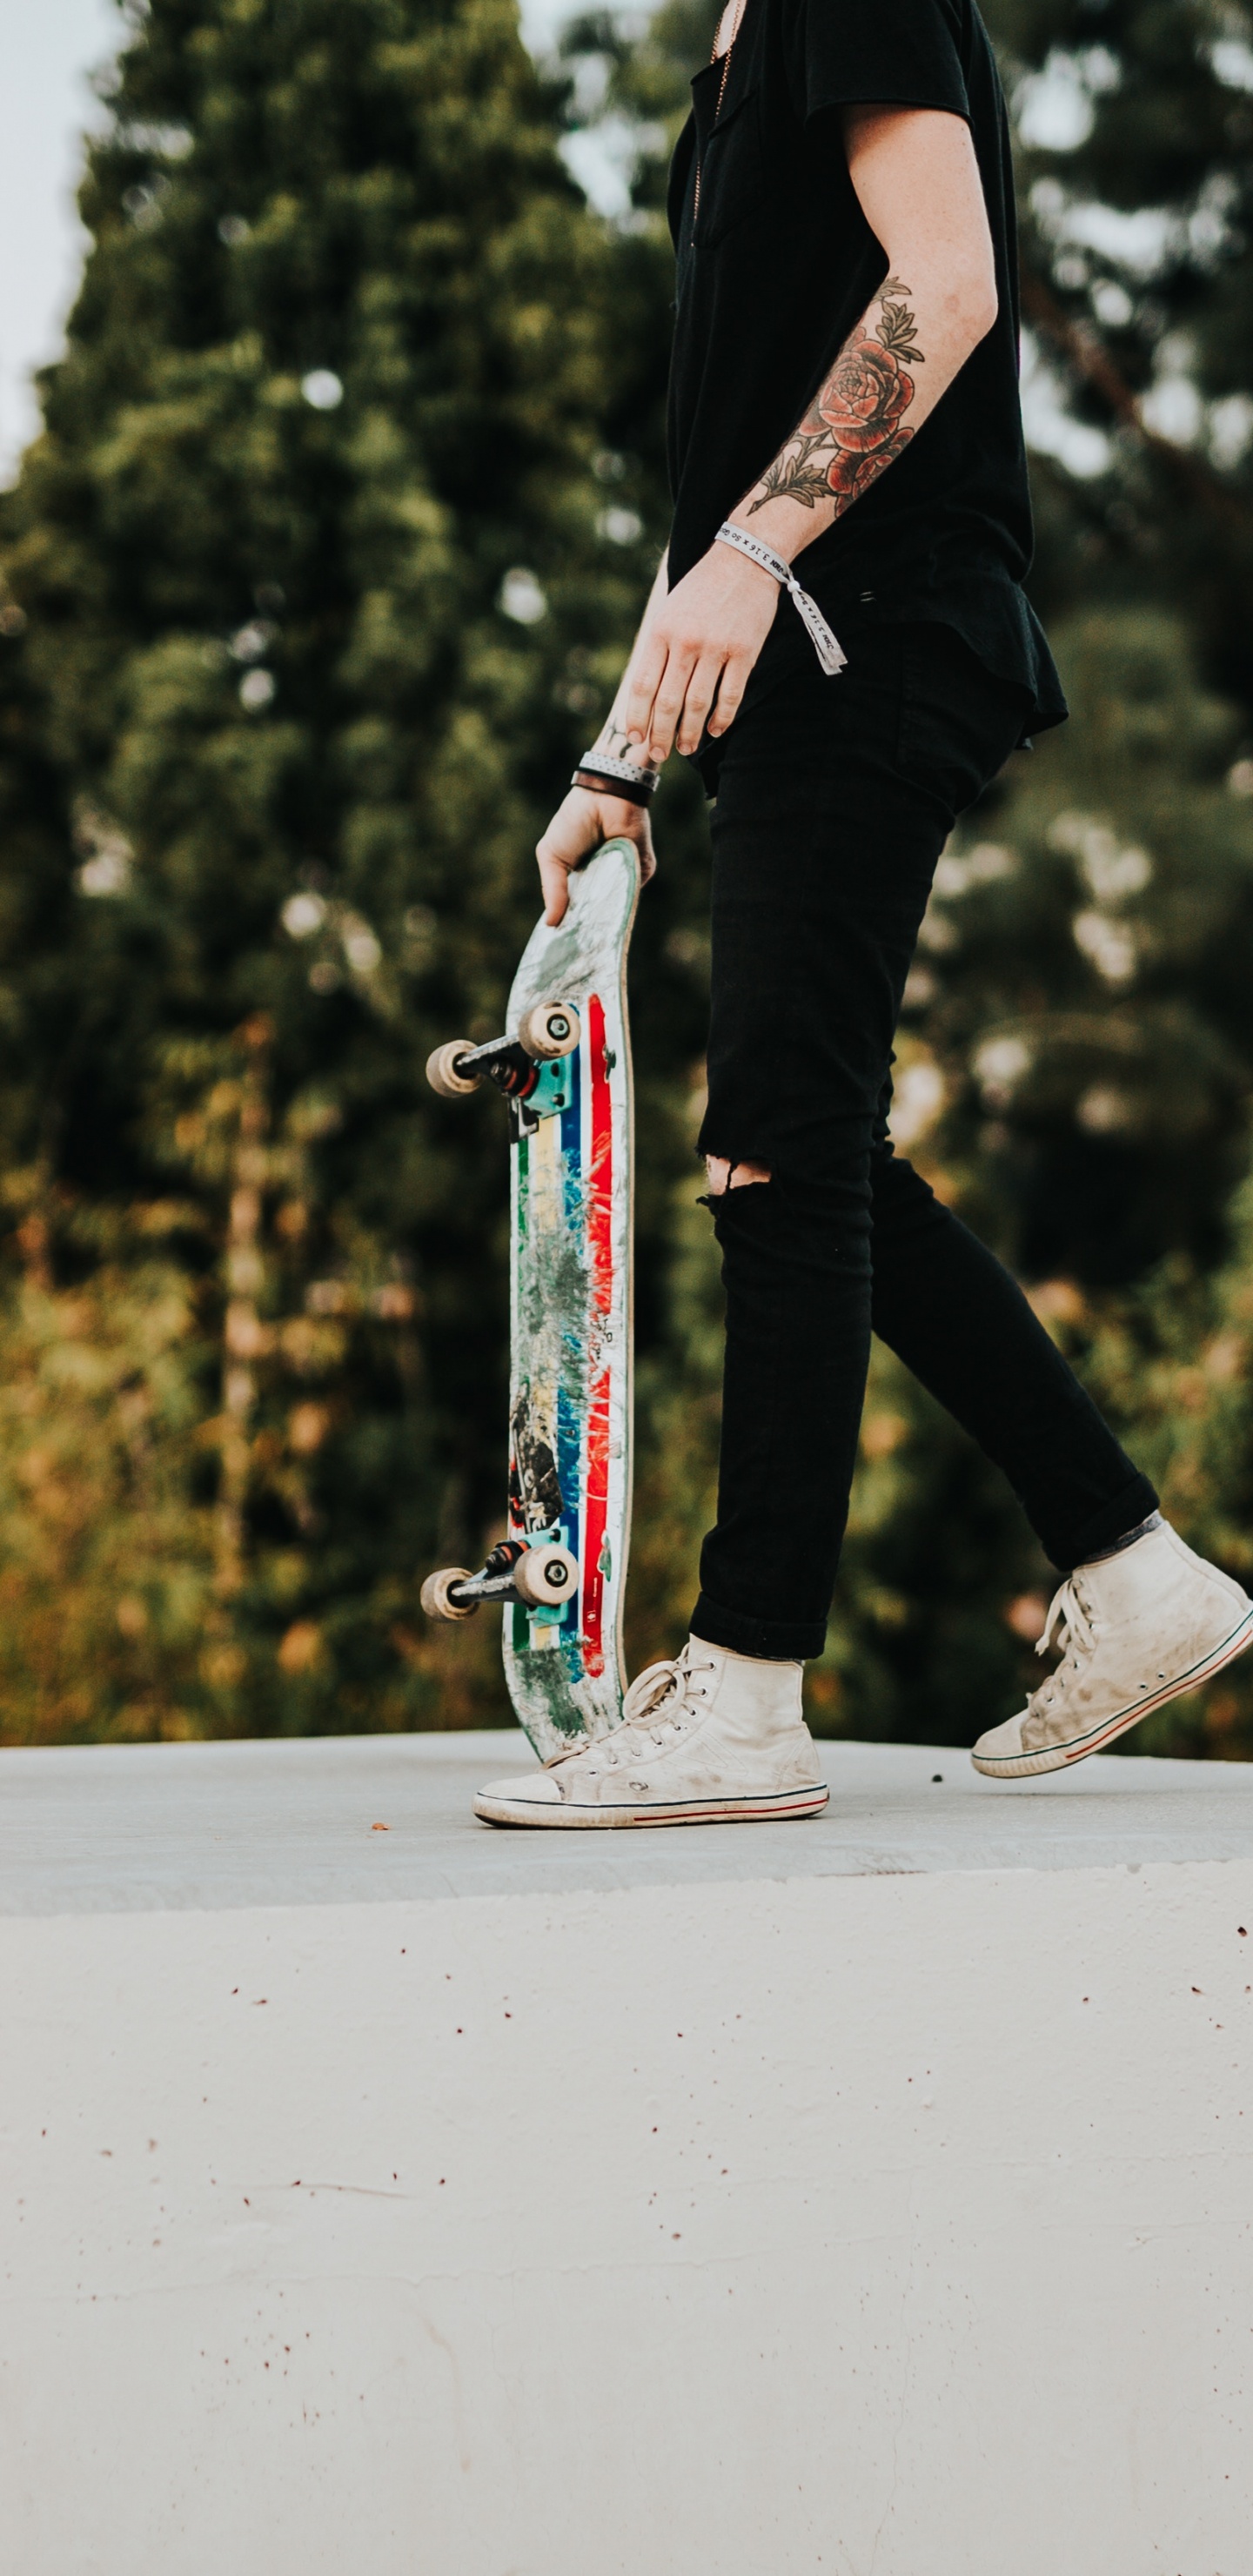 Man in Black Pants and Black Jacket Riding Skateboard. Wallpaper in 1440x2960 Resolution